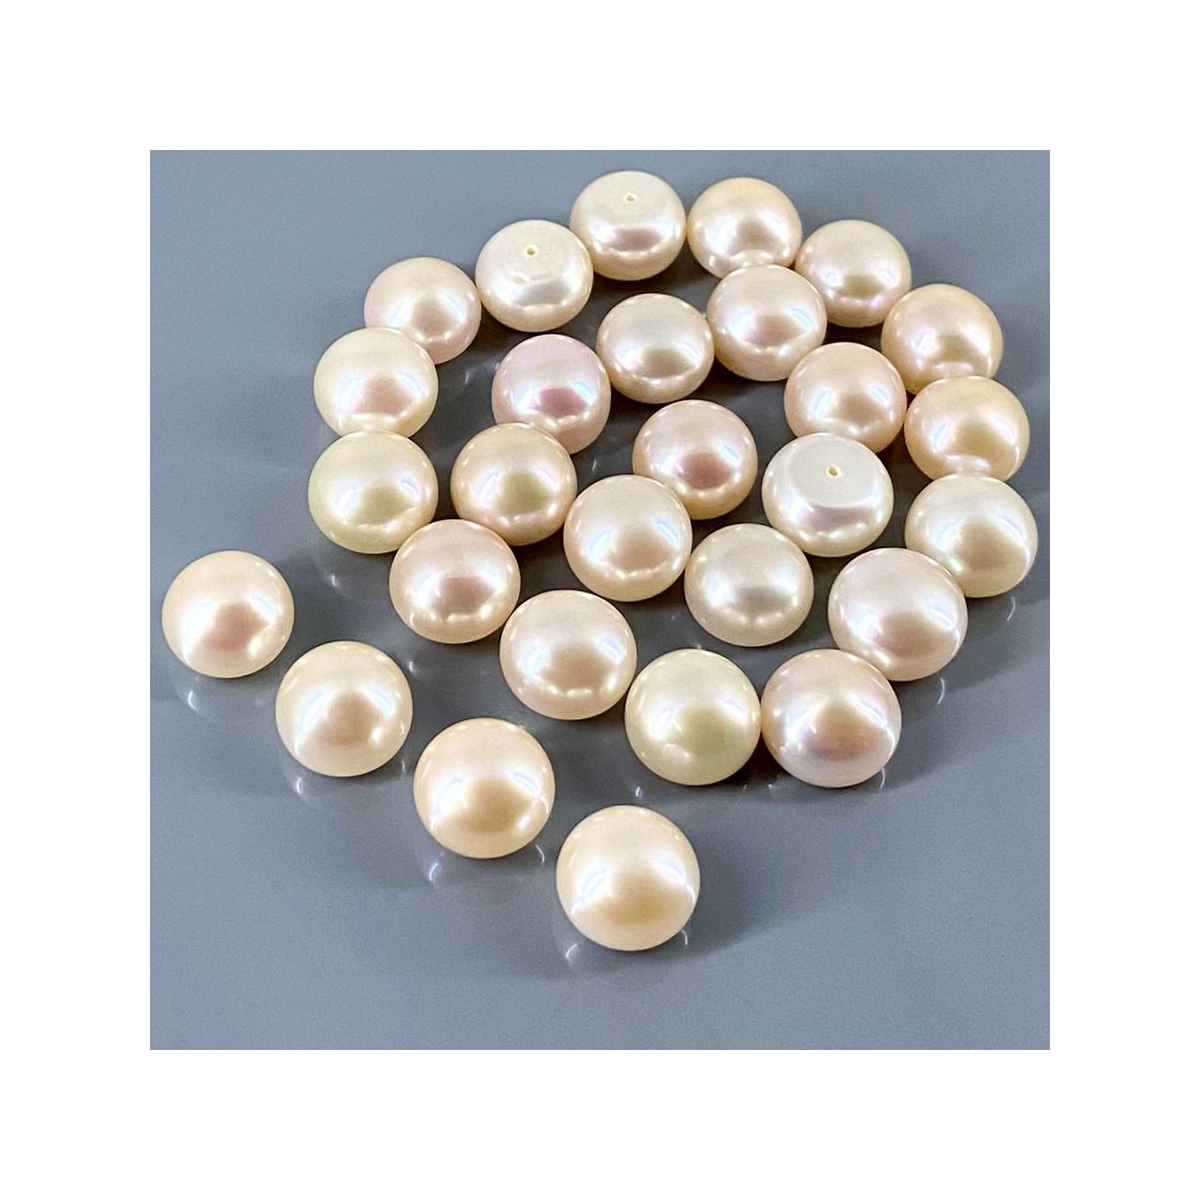 Peach Freshwater Pearl 10.5-11mm Smooth Round AAA Grade Pearl Beads Lot -  159545